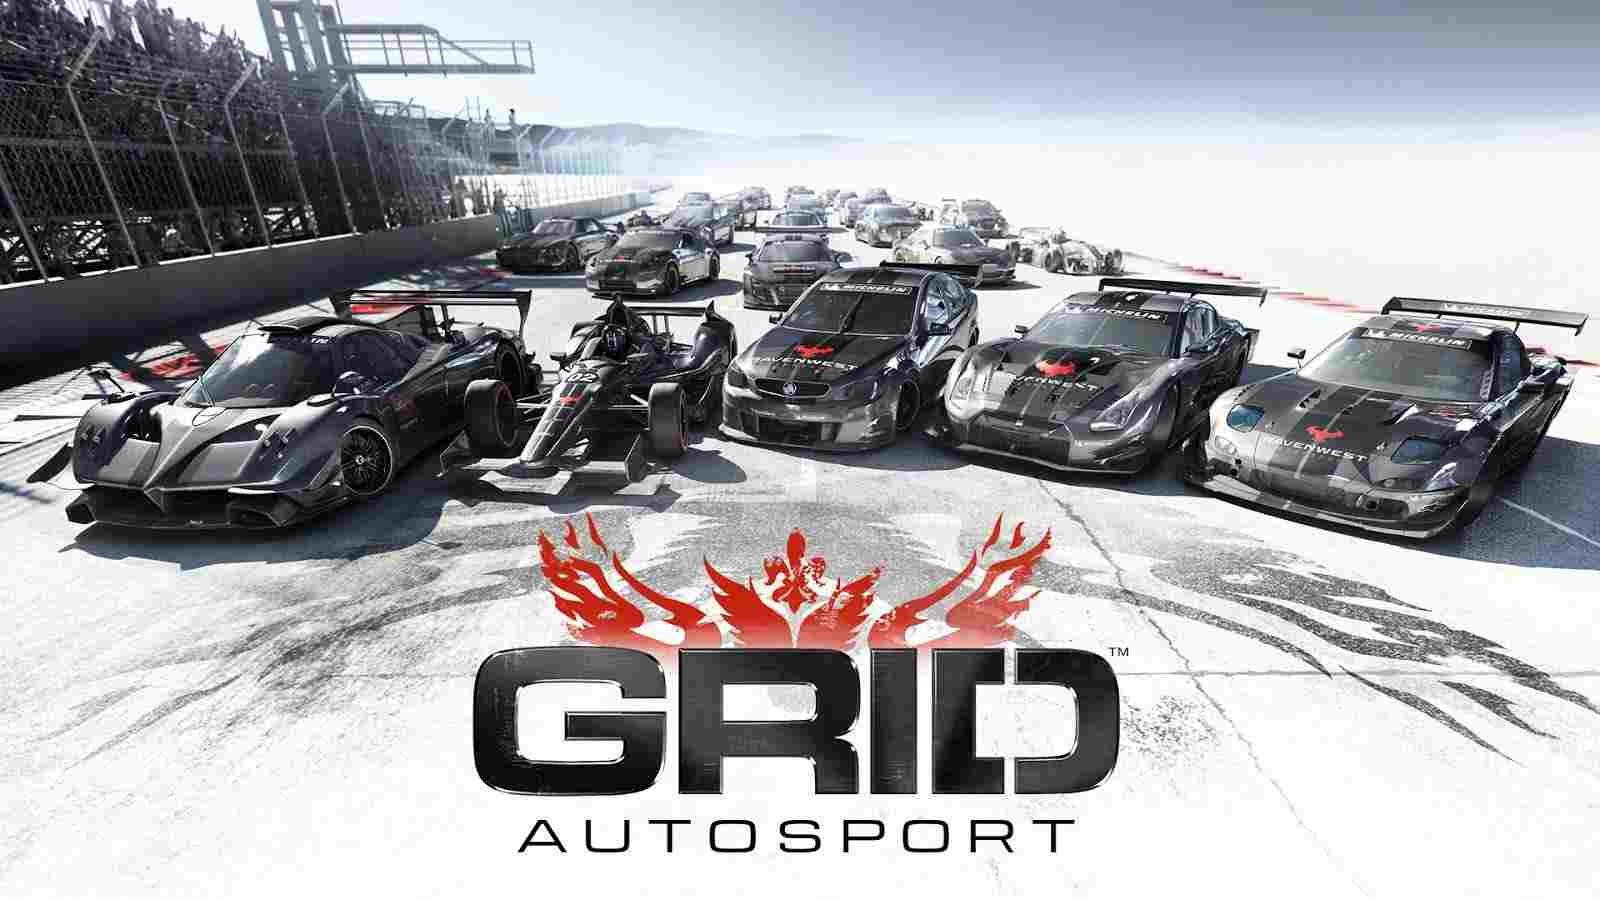 GRID Autosport 1.6.1RC2-android APK MOD [Huge Amount Of Money gold, Paid license $9.99]